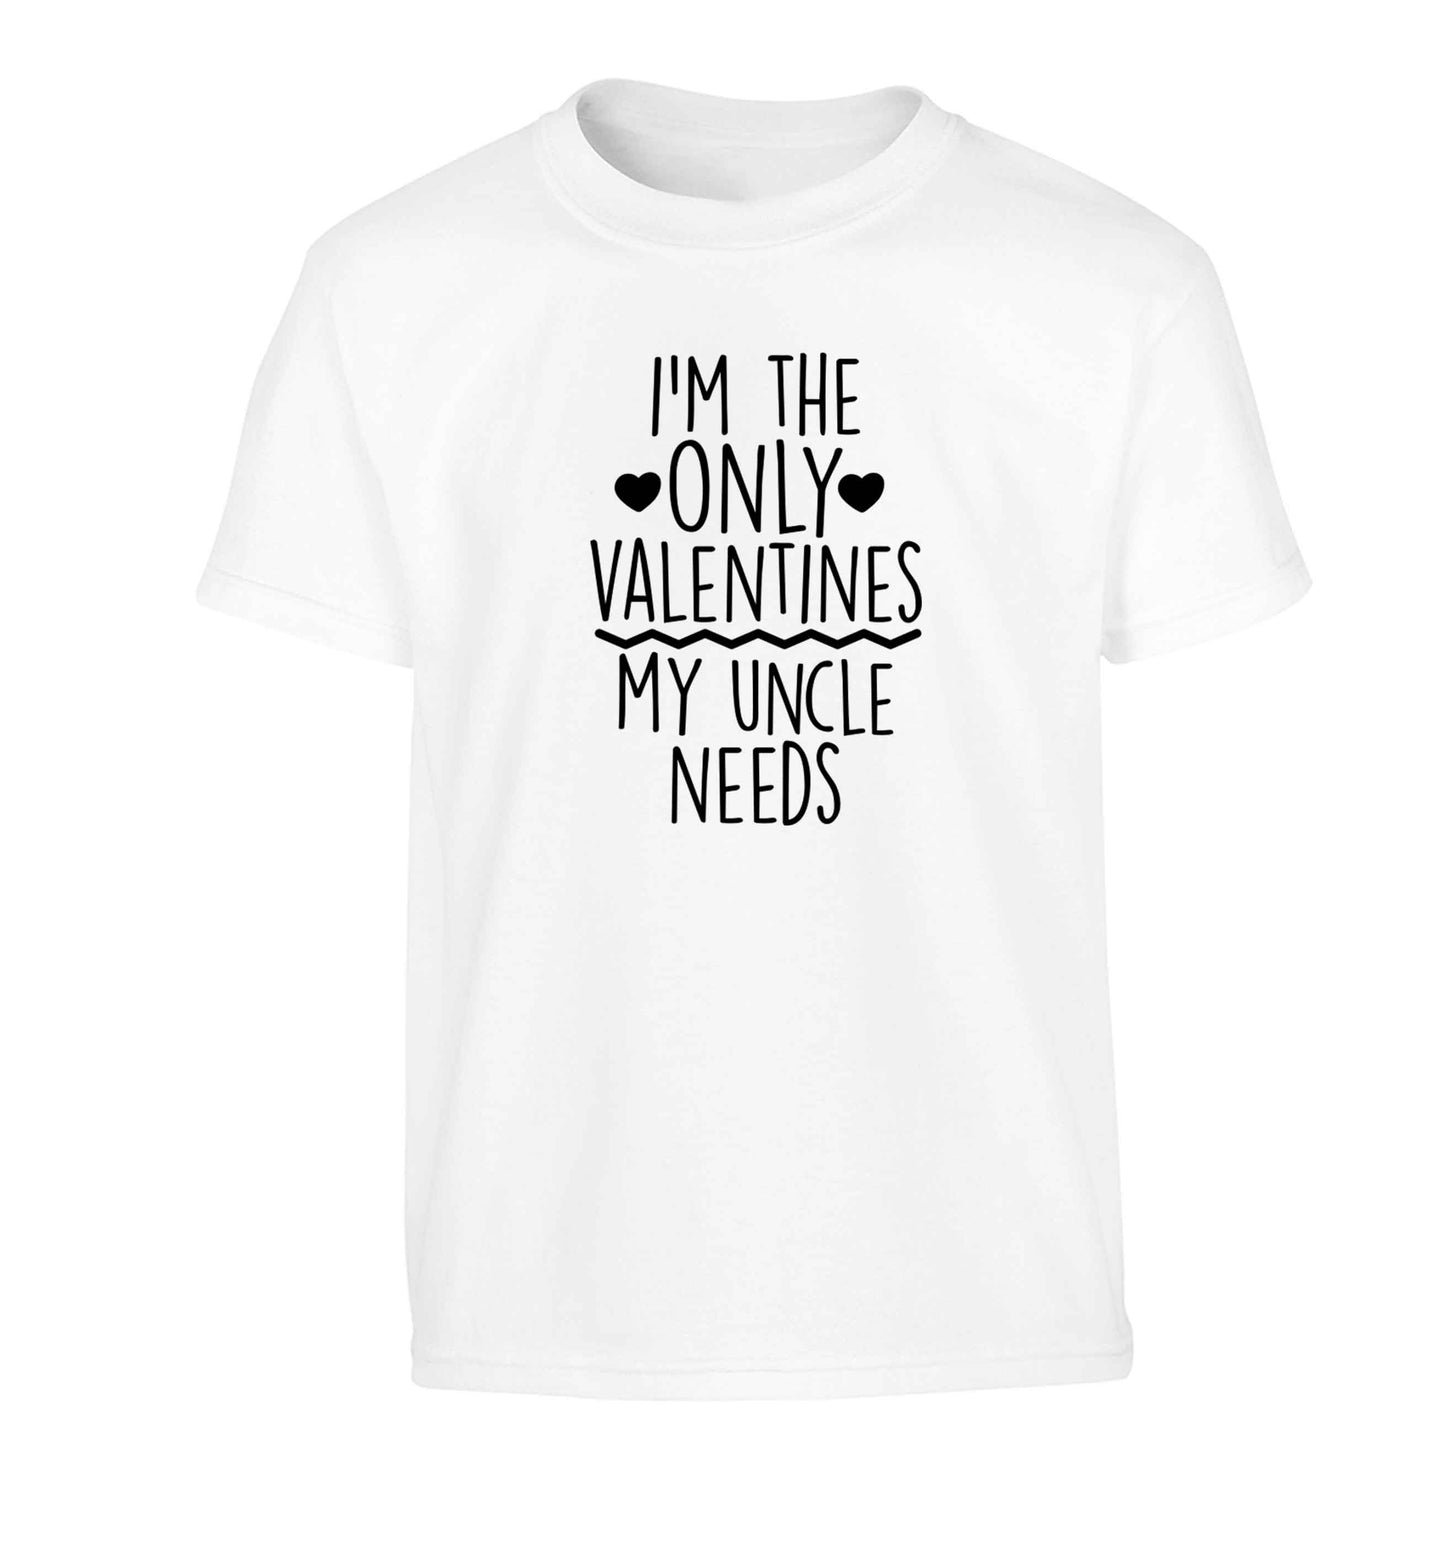 I'm the only valentines my uncle needs Children's white Tshirt 12-13 Years